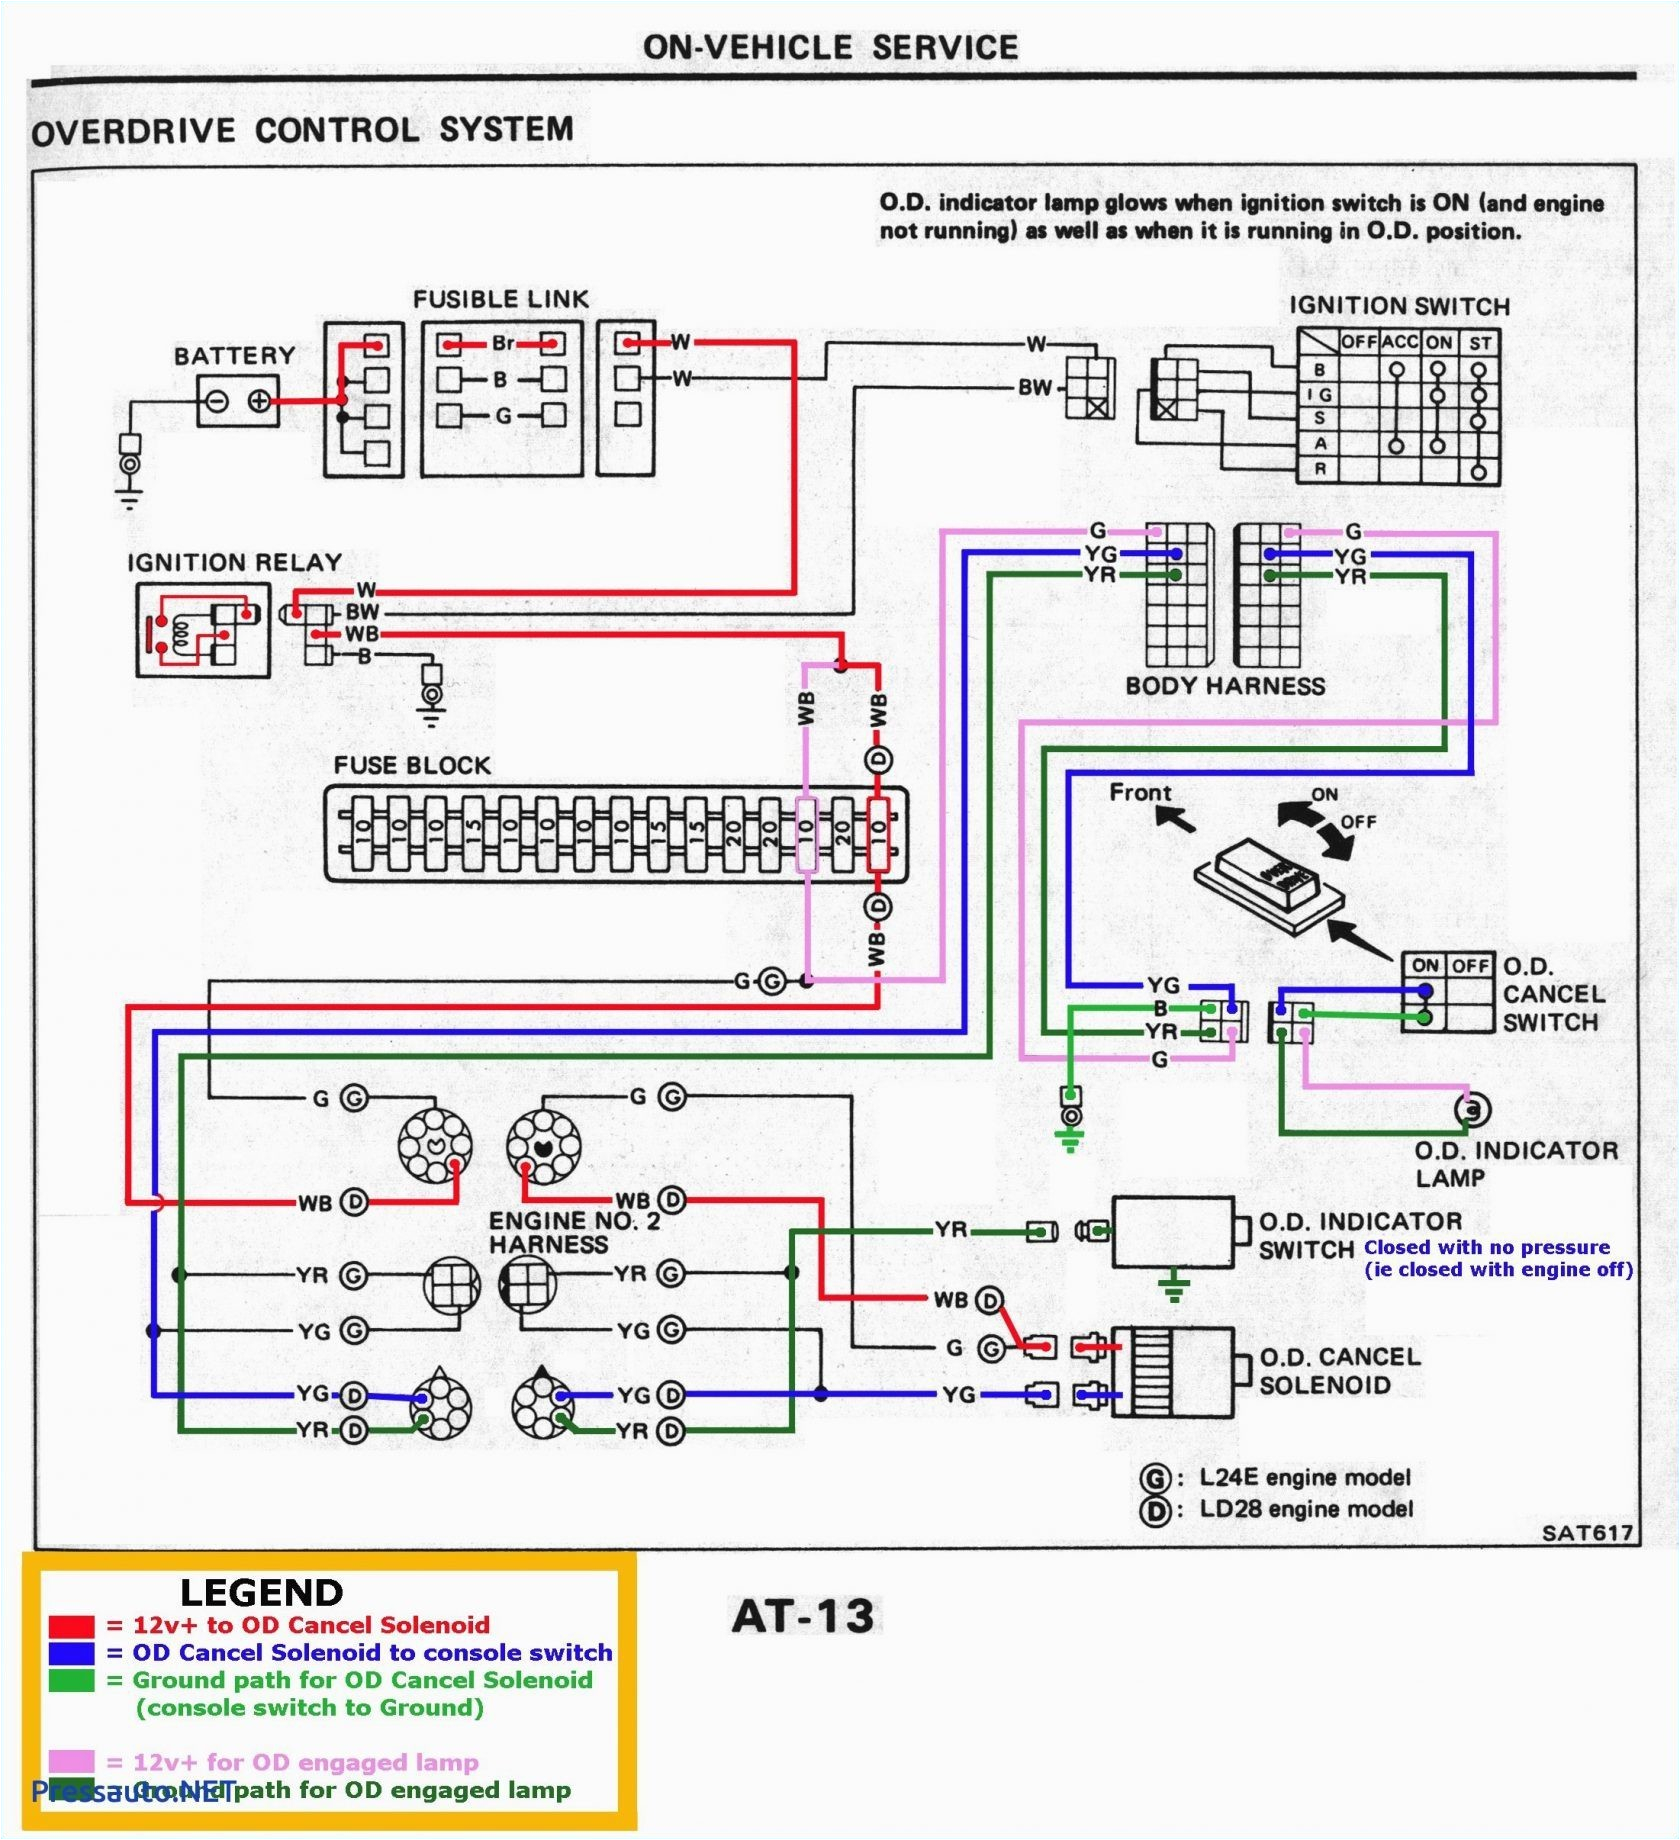 dme wiring diagram wiring diagram toolbox rpc wiring harness diagram wiring diagram operations dme thermocouple wiring